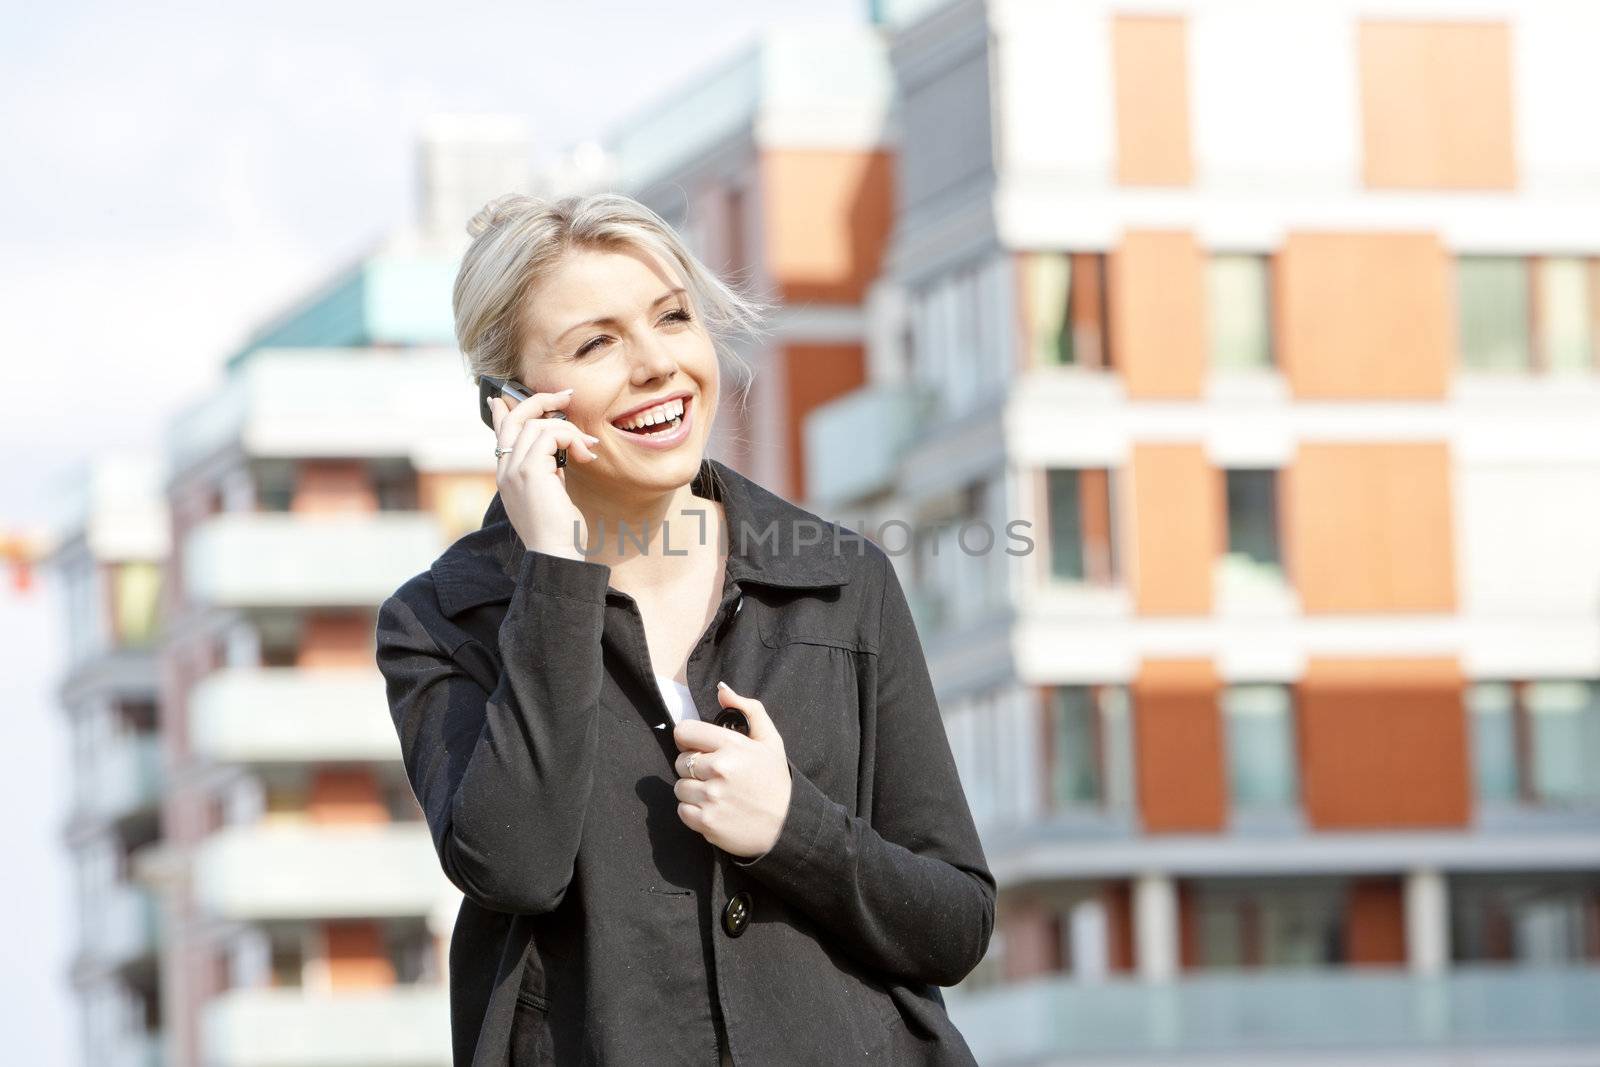 portrait of telephoning young businesswoman by phbcz